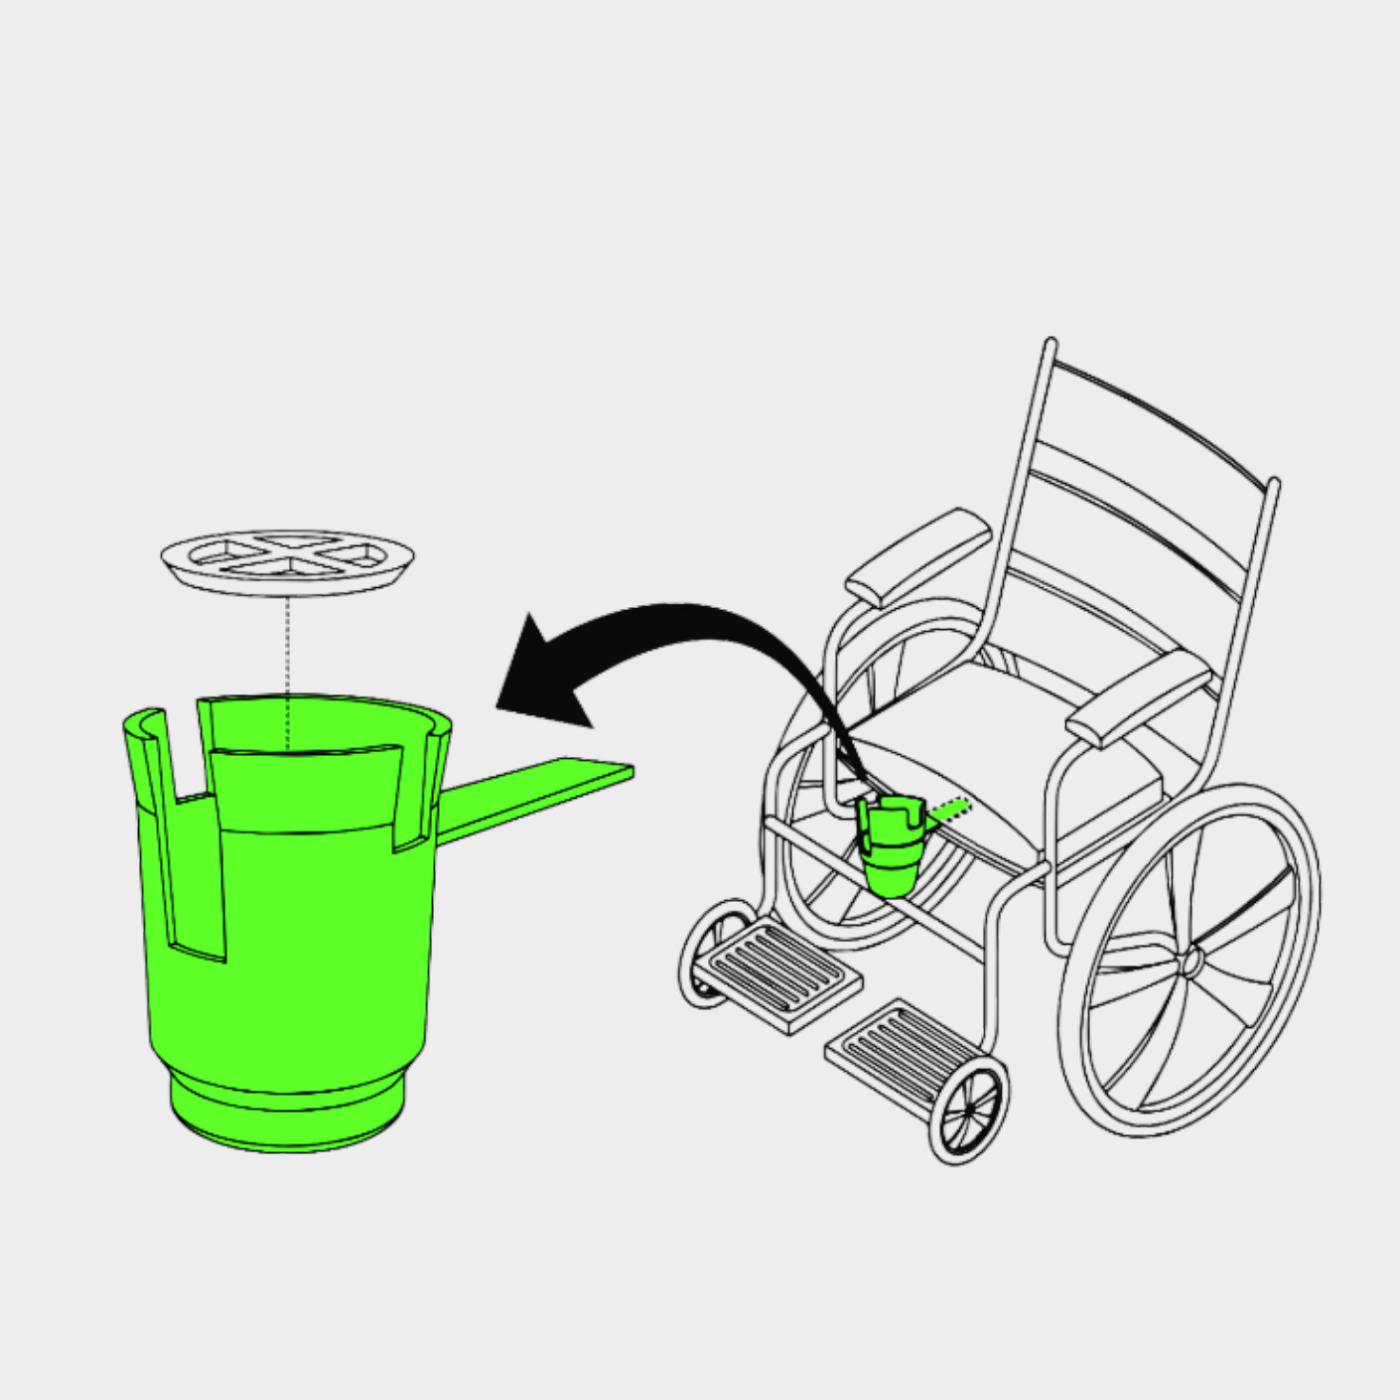 HandiCup line drawing. Insert arm of HandiCup under wheelchair cushion. no tools needed.